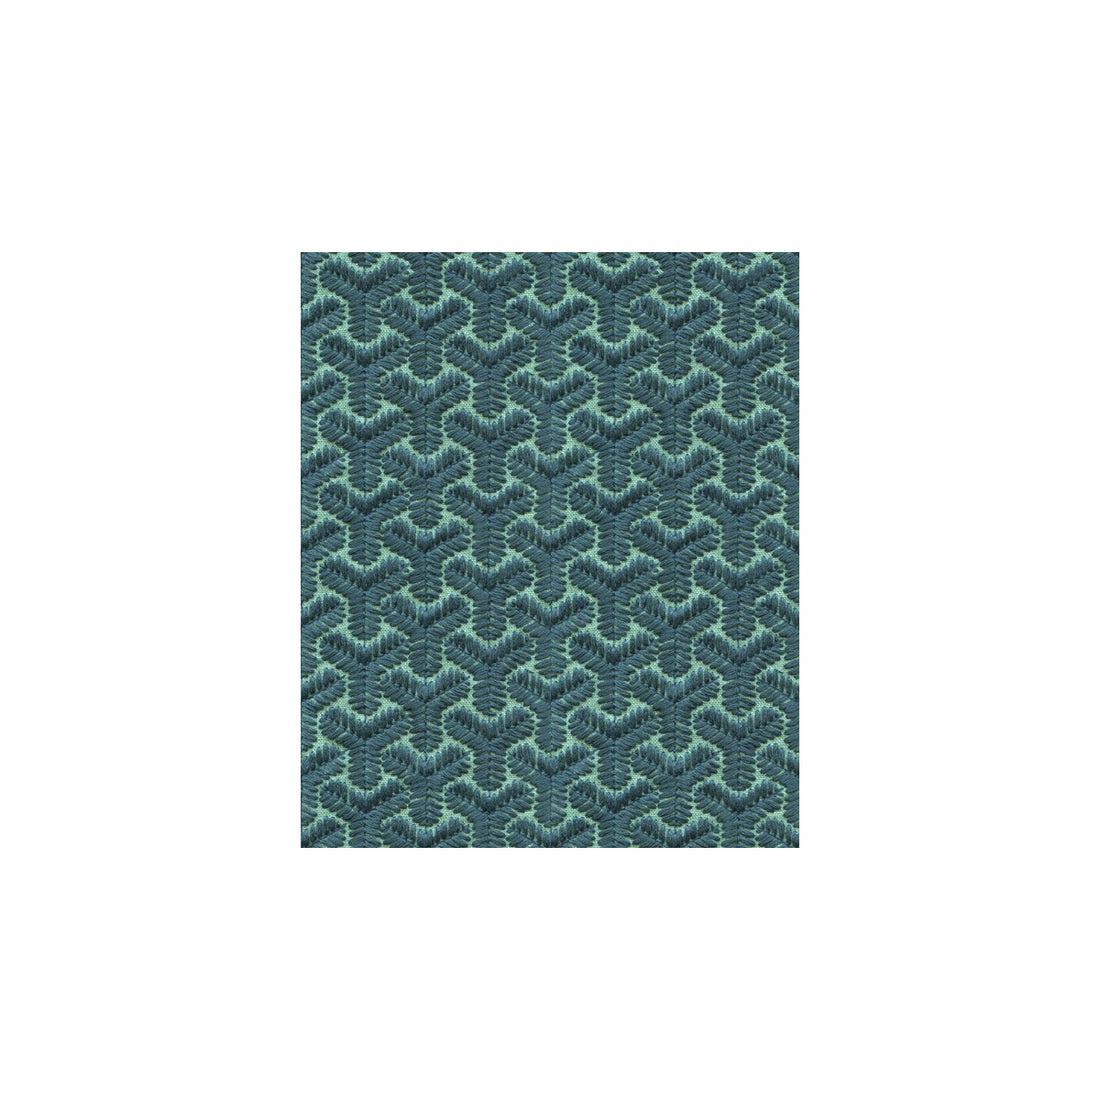 Chengtudoor Emb fabric in blue/aqua color - pattern BF10523.2.0 - by G P &amp; J Baker in the David Hicks 3 By Ashley Hicks collection